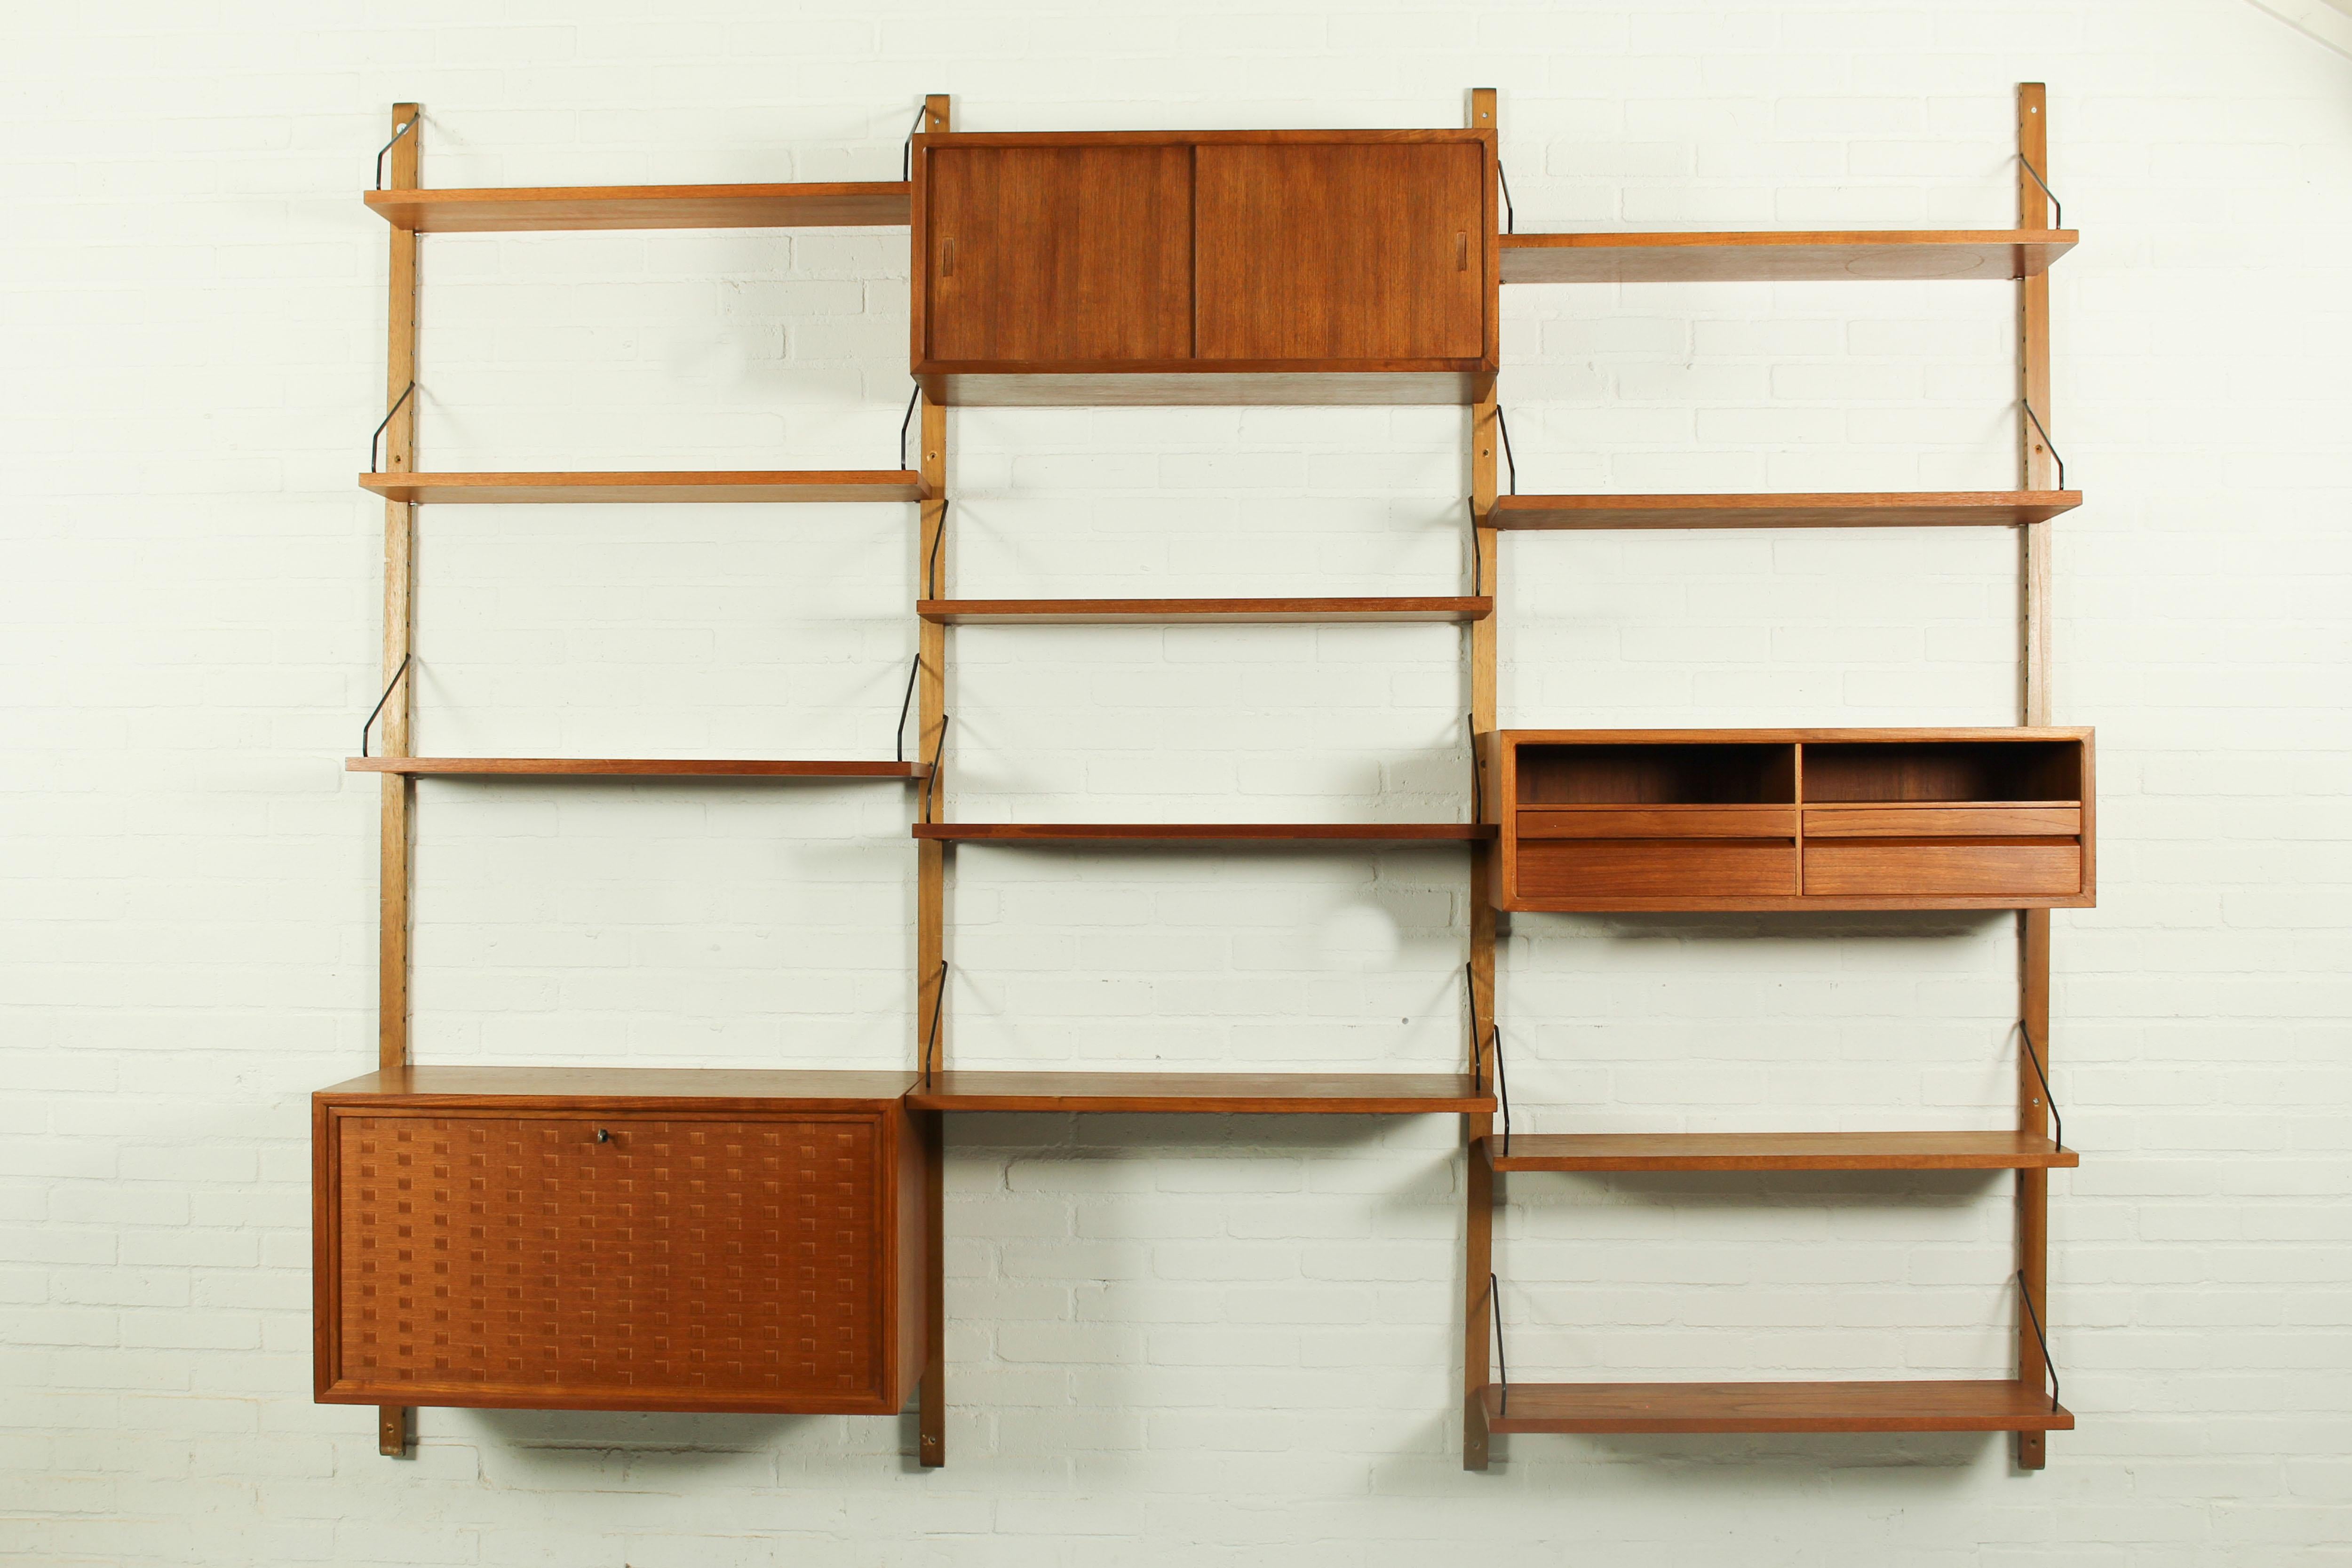 Shelving system in teak designed by Poul Cadovius for Cado, Denmark. This 